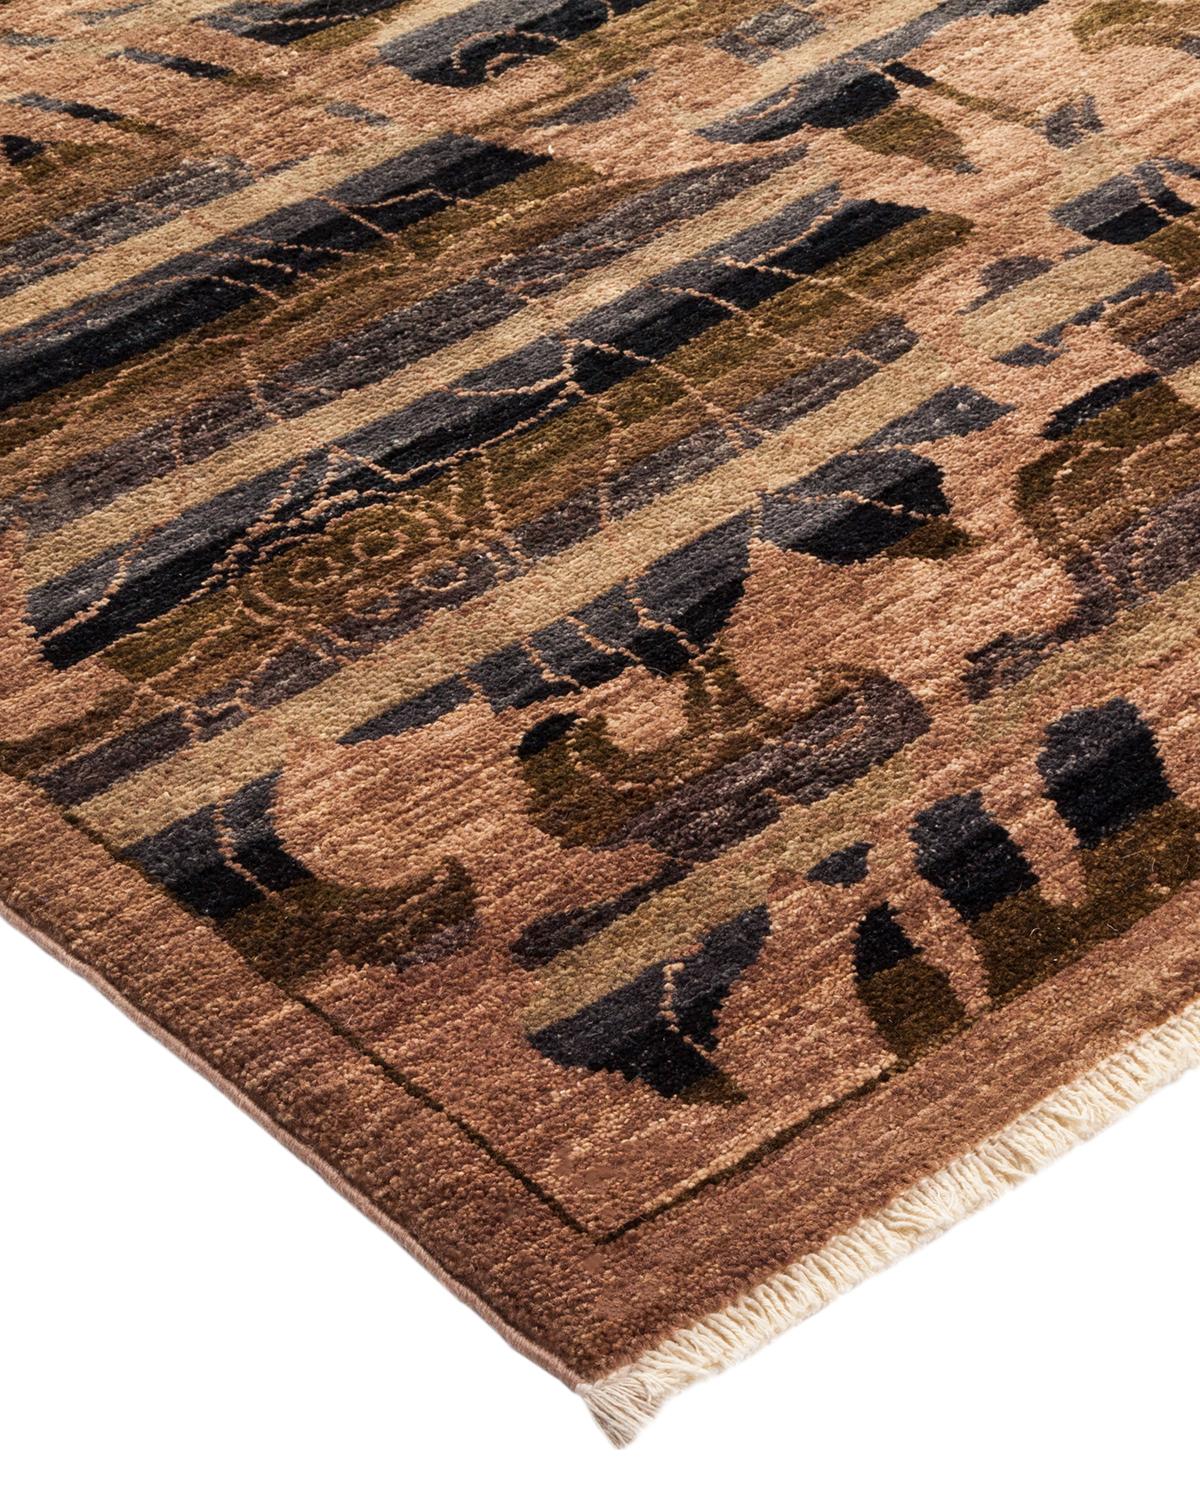 With simple, bold, yet informal designs and a broad palette of colors that ranges from earthy hues to brilliant gems, the rugs in the Arts & Crafts collection infuse a room with a sense of sophisticated rebellion. Nature-inspired motifs are the